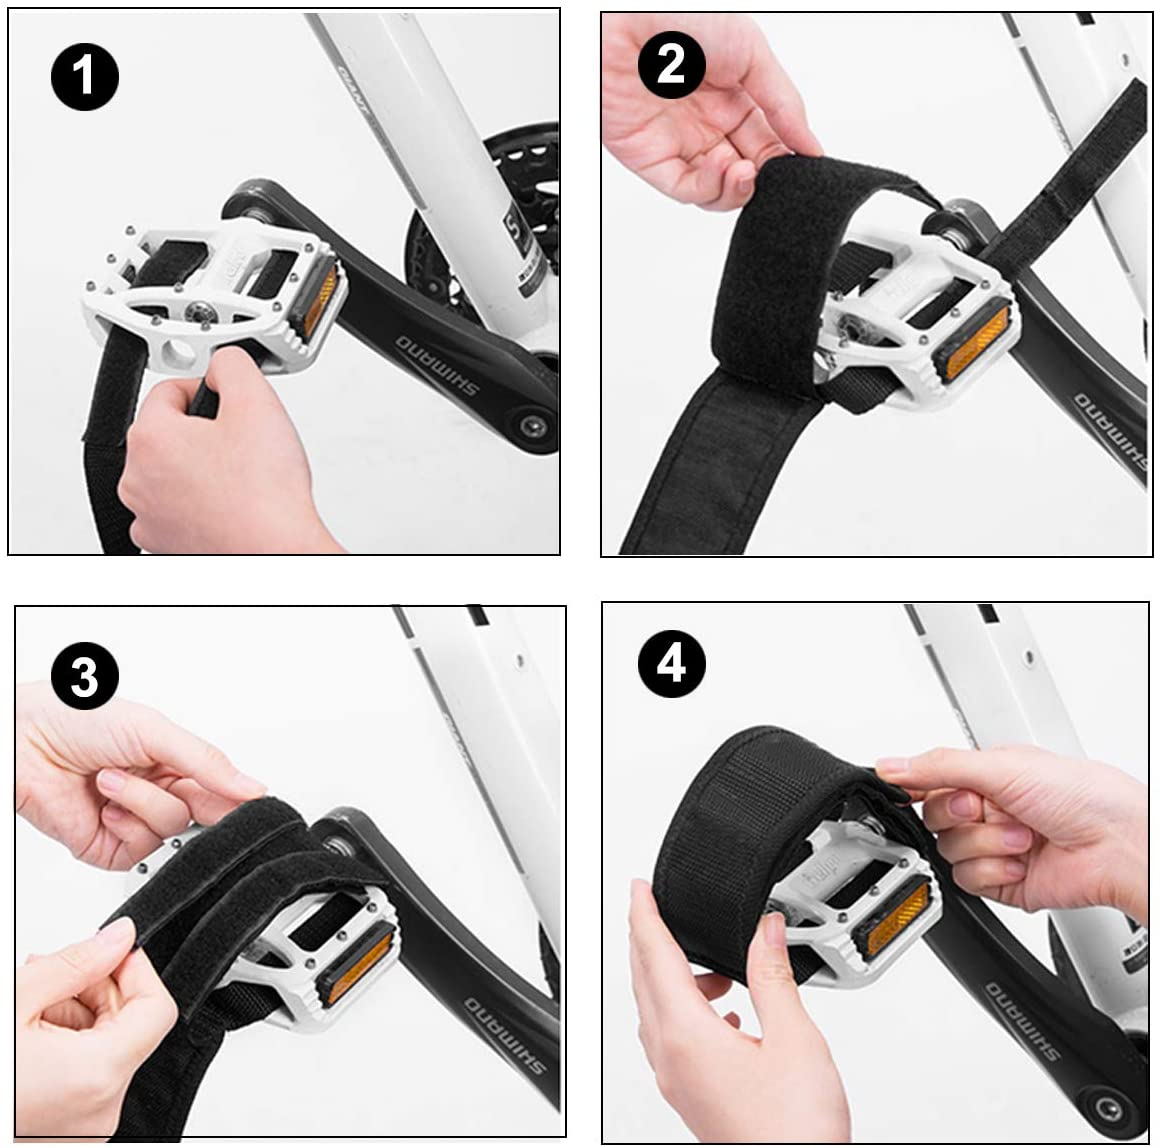 Make sure that your pedal straps fit over your feet comfortably and securely.